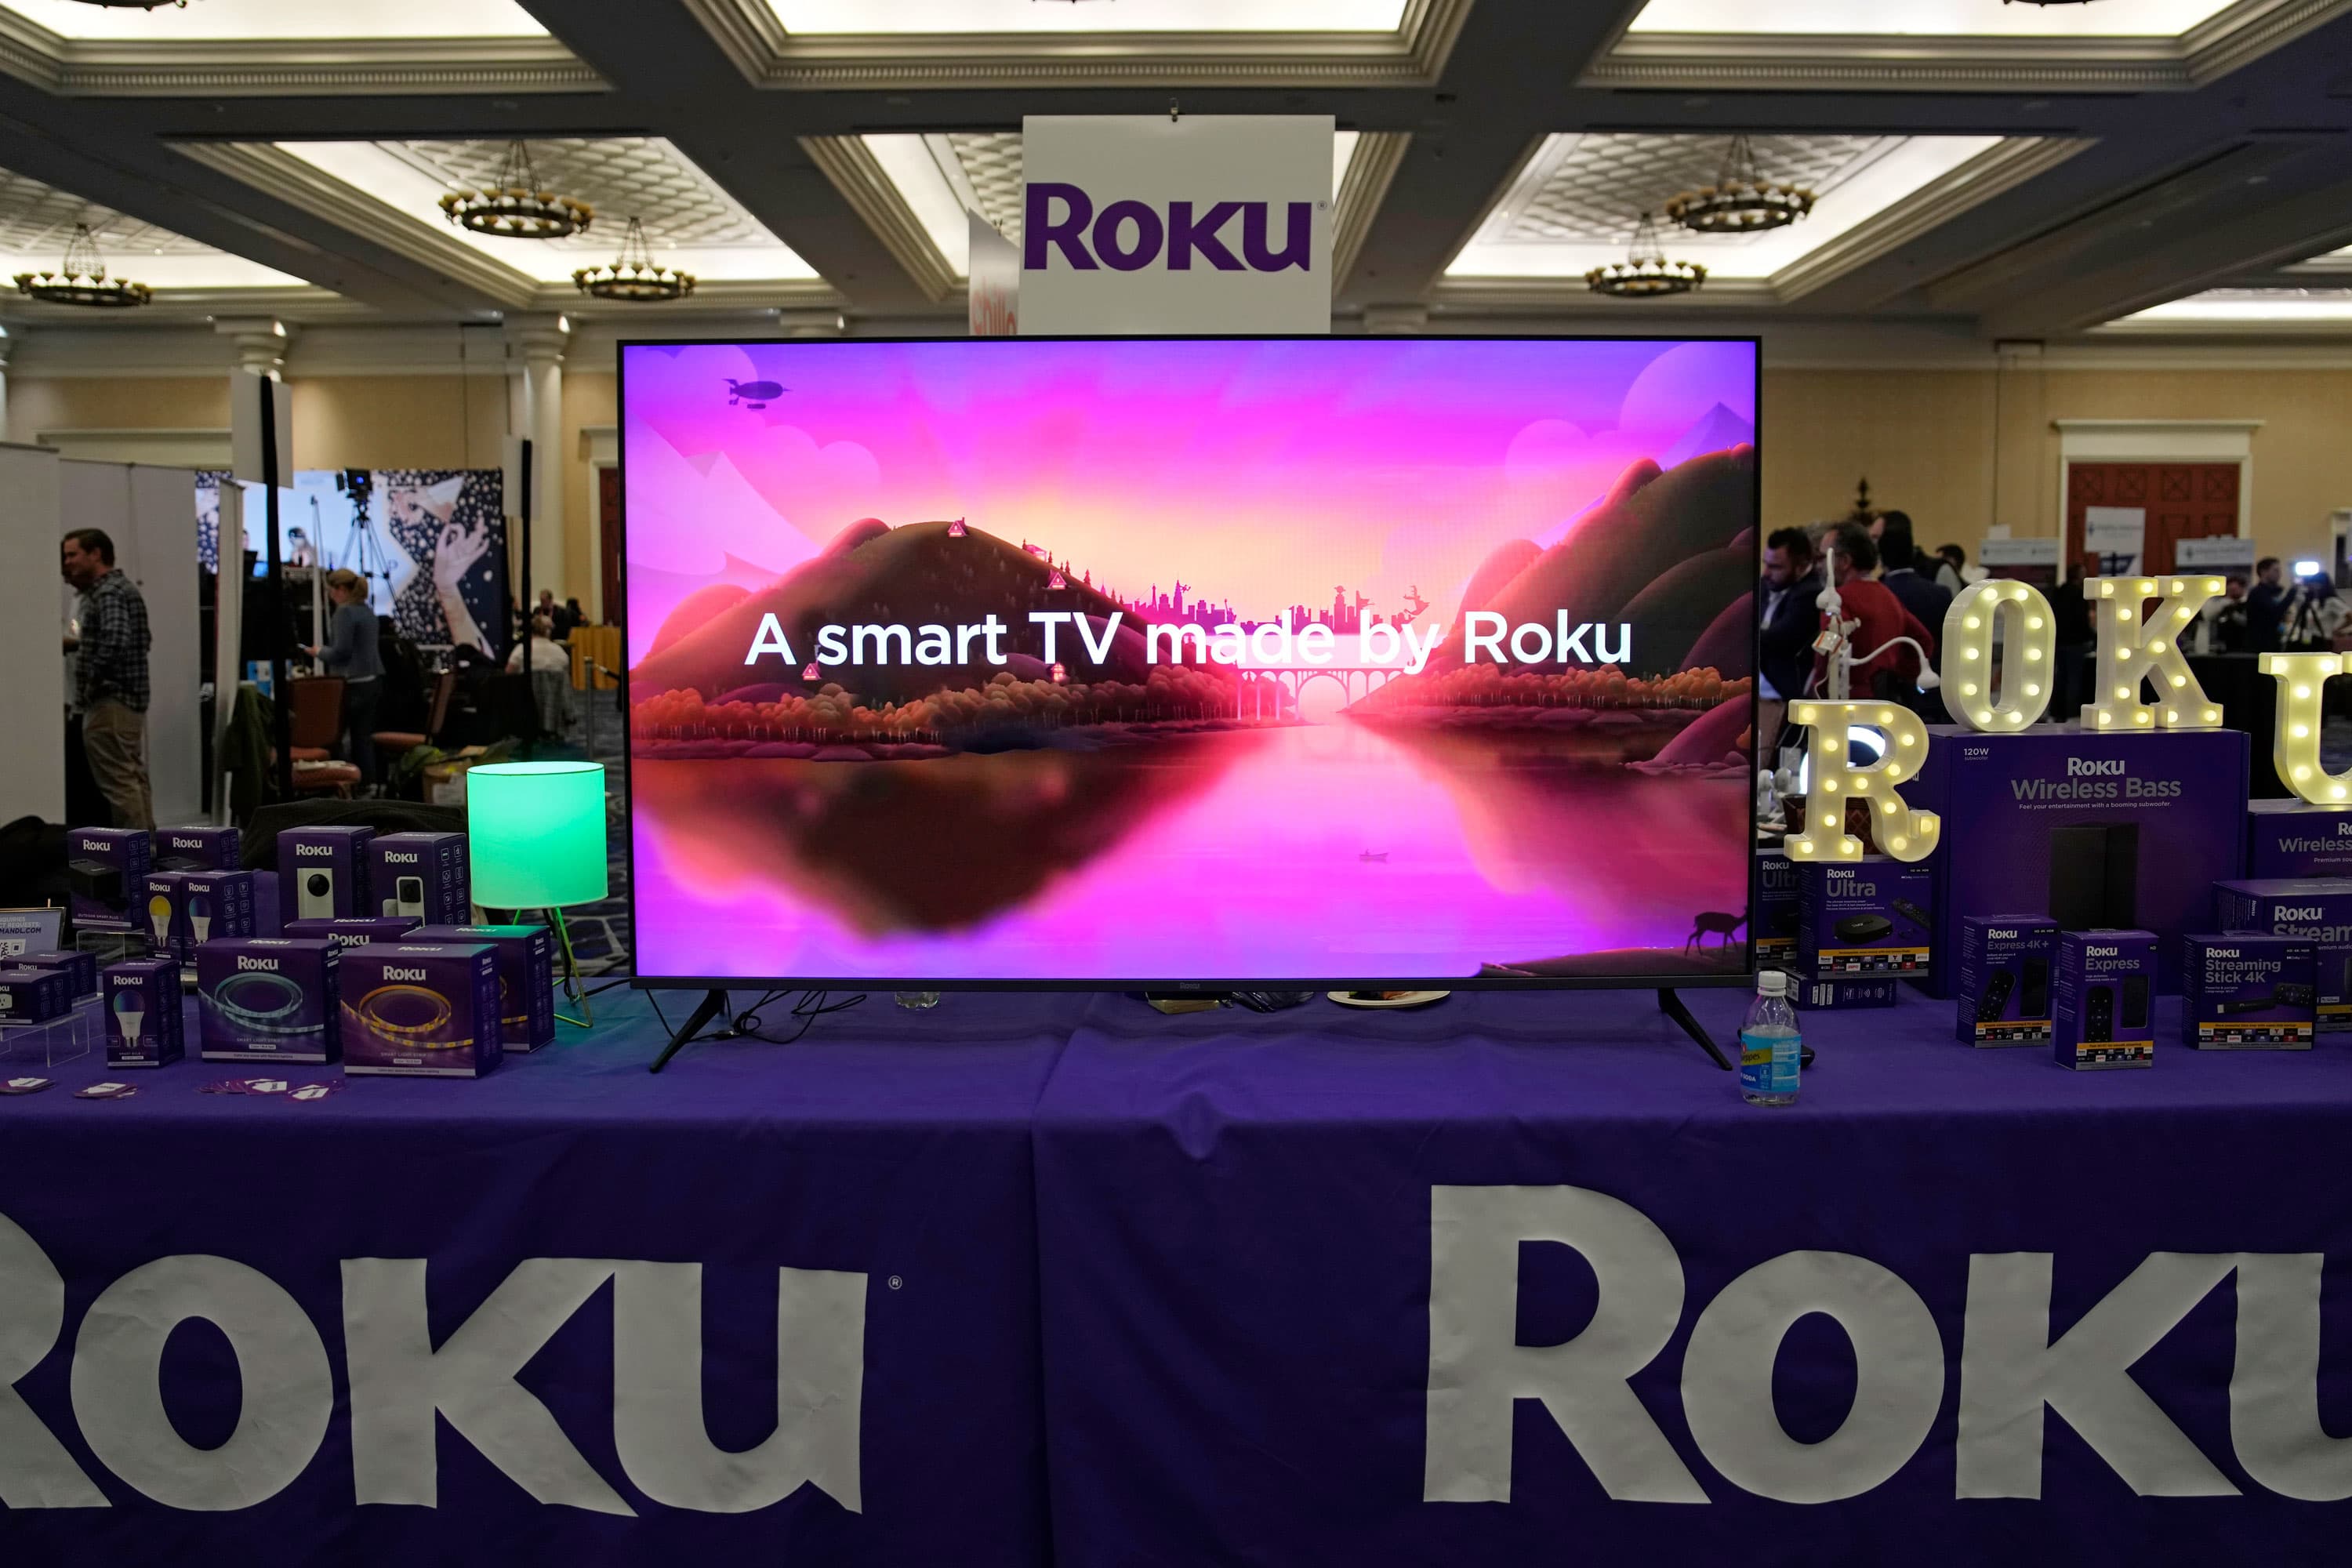 Bank of America double upgrades Roku, sees ad spending improving through 2023